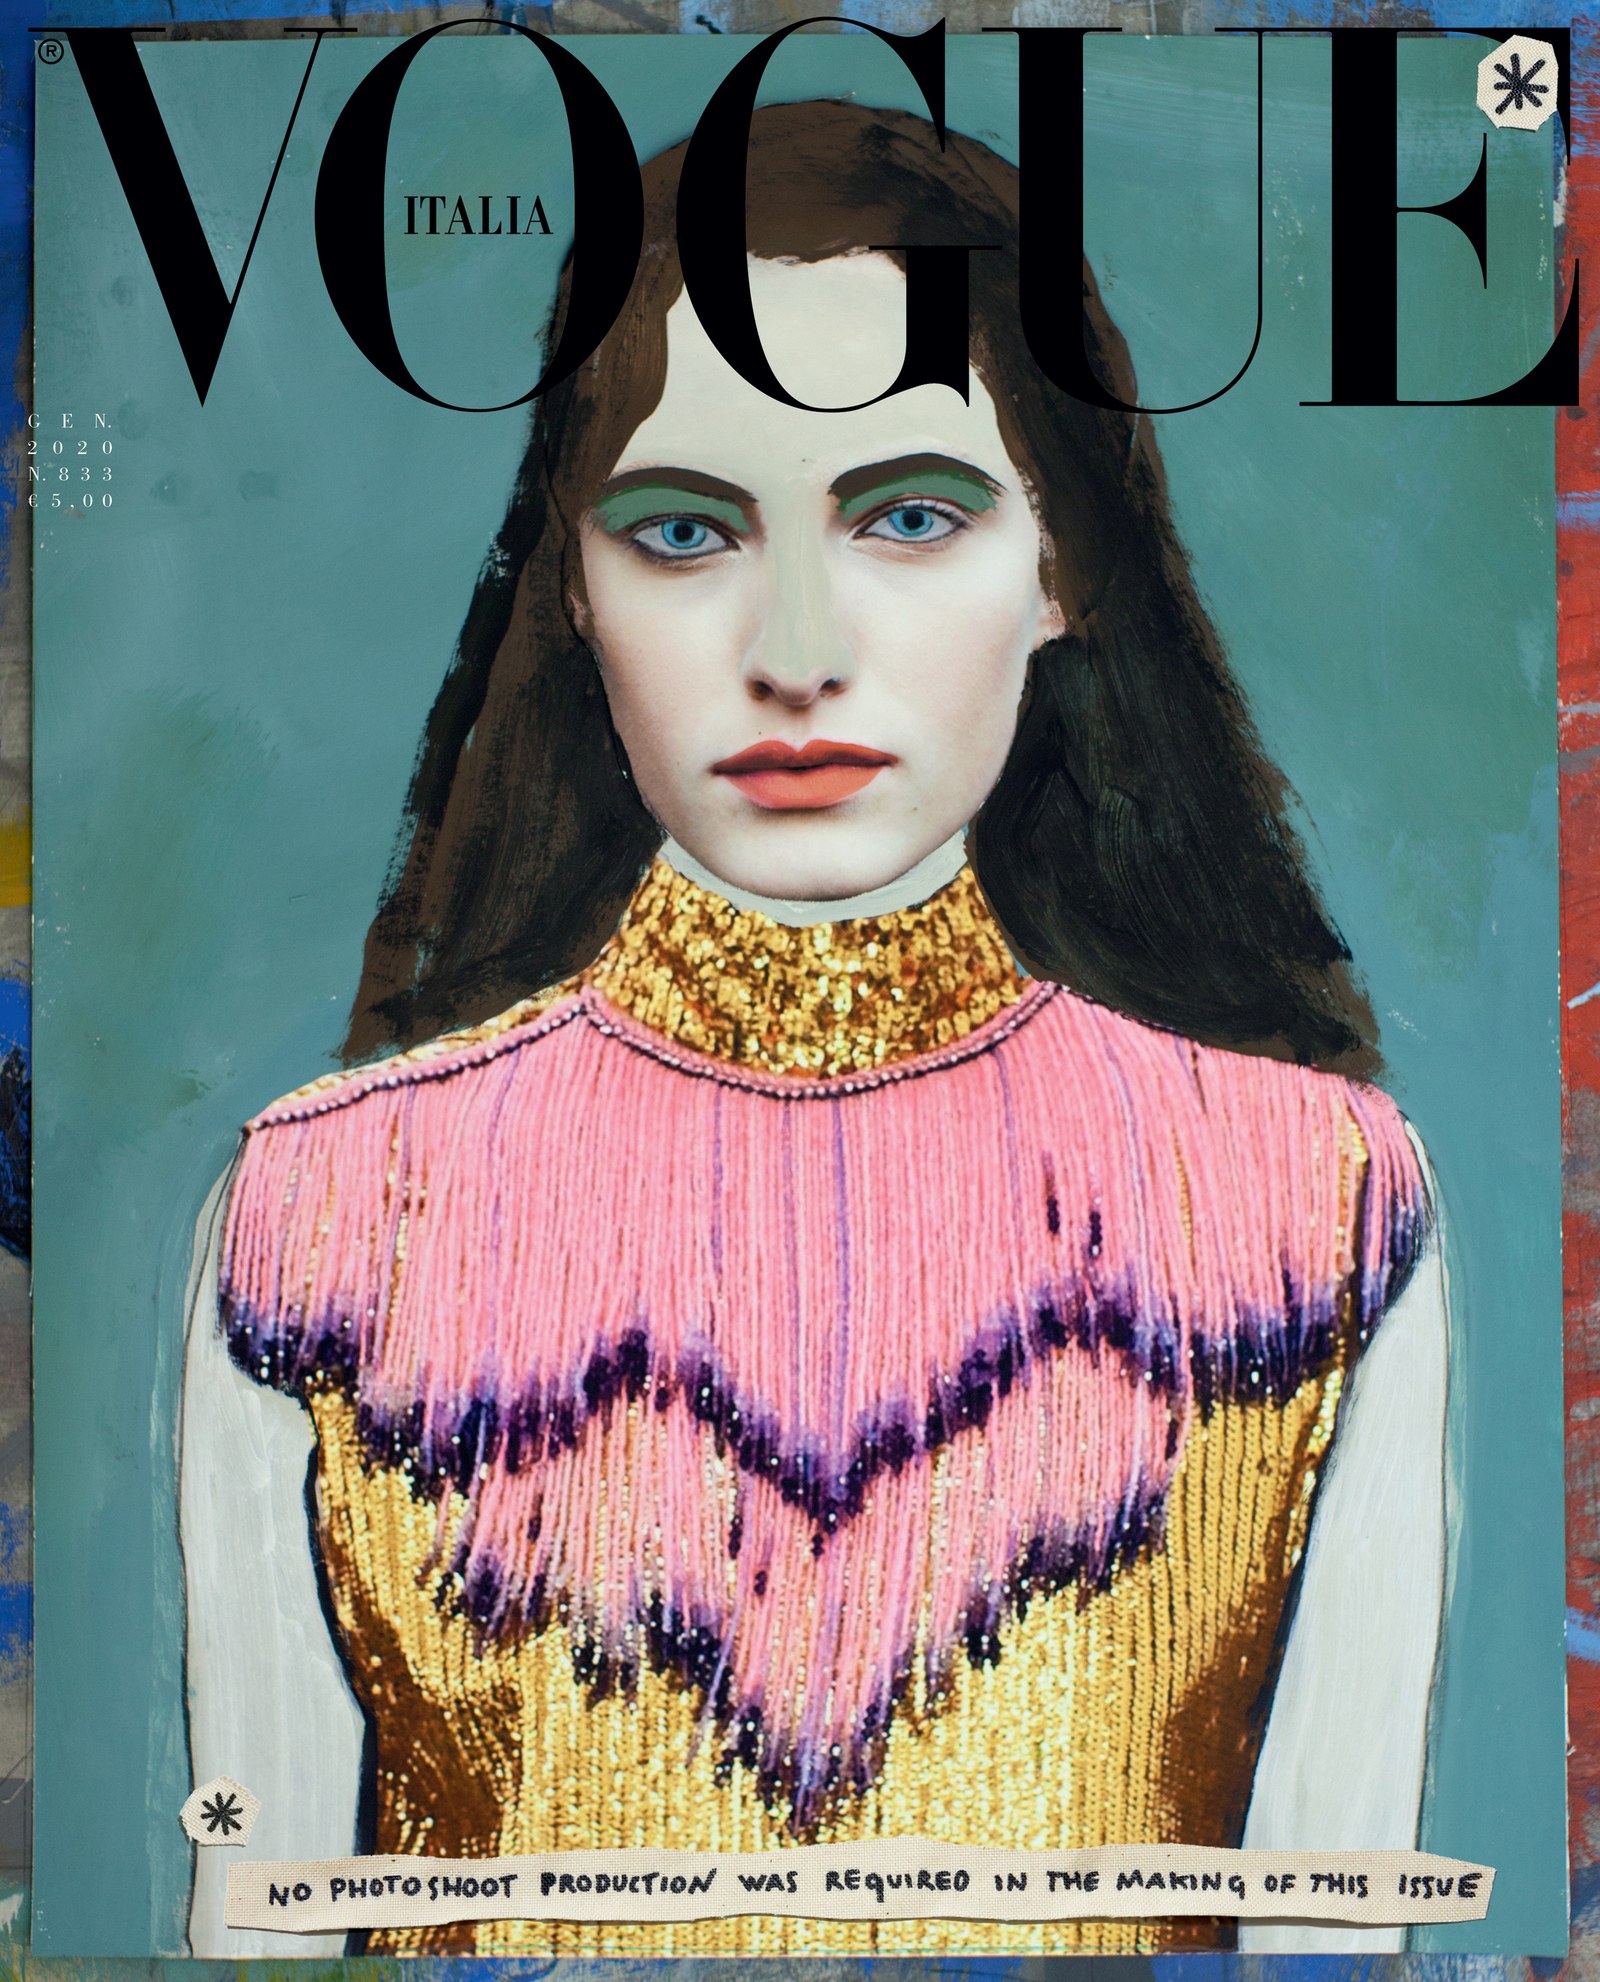 Sustainable Fashion Takes Center Stage in Vogue Italia January 2020